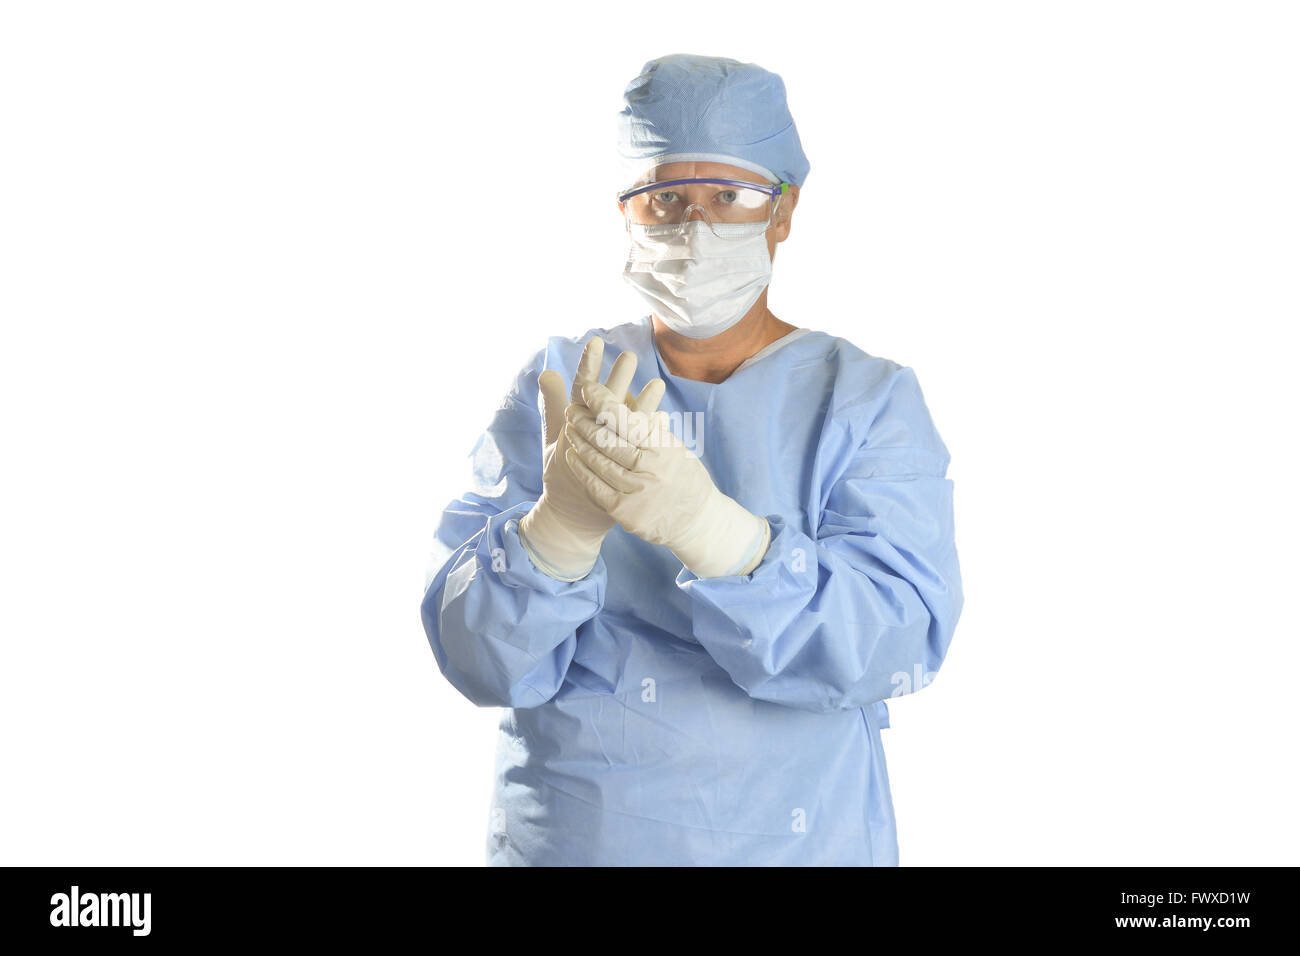 Surgical technician with safety glasses, mask, and surgical gloves on white background. Stock Photo